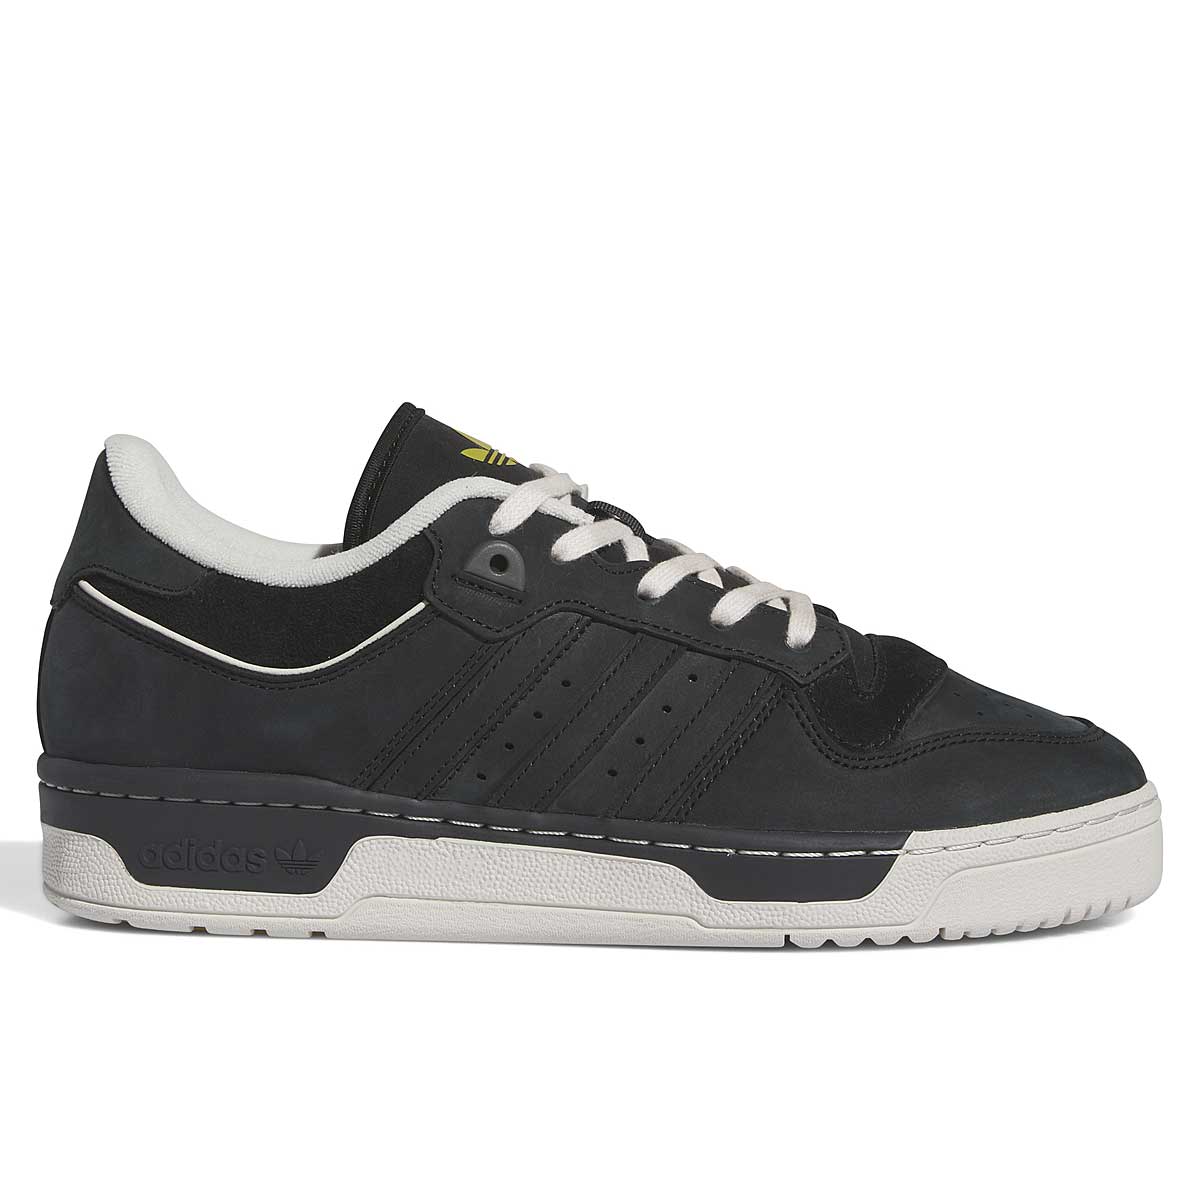 Image of Adidas Rivalry 86 Low Chapter 3, Cblack/talc/cwhite